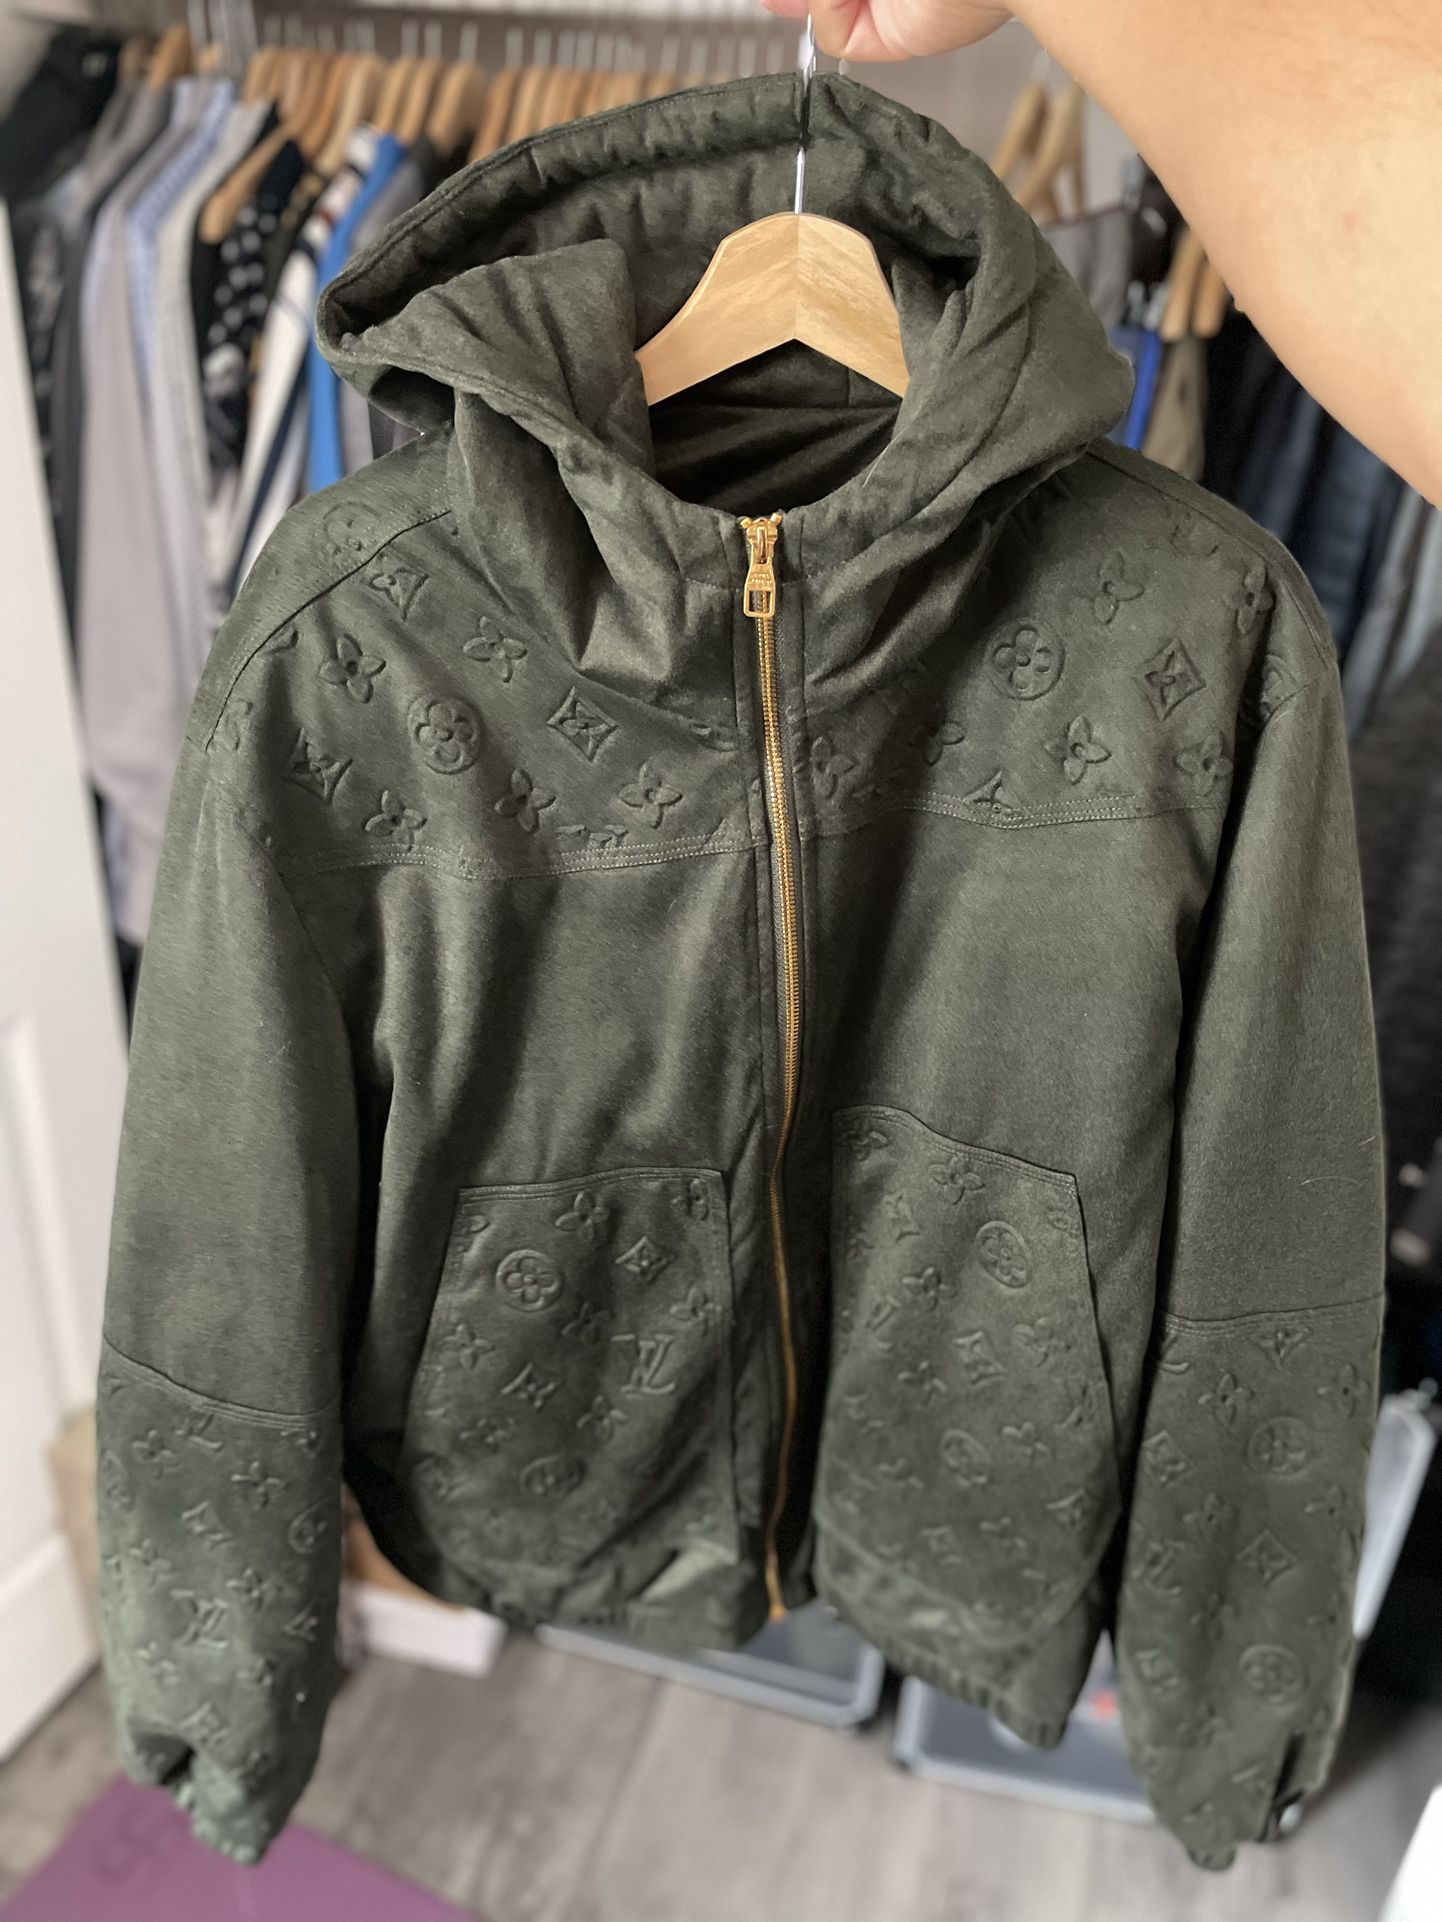 Louis Vuitton Jackets for Sale in Colorado Springs, CO - OfferUp